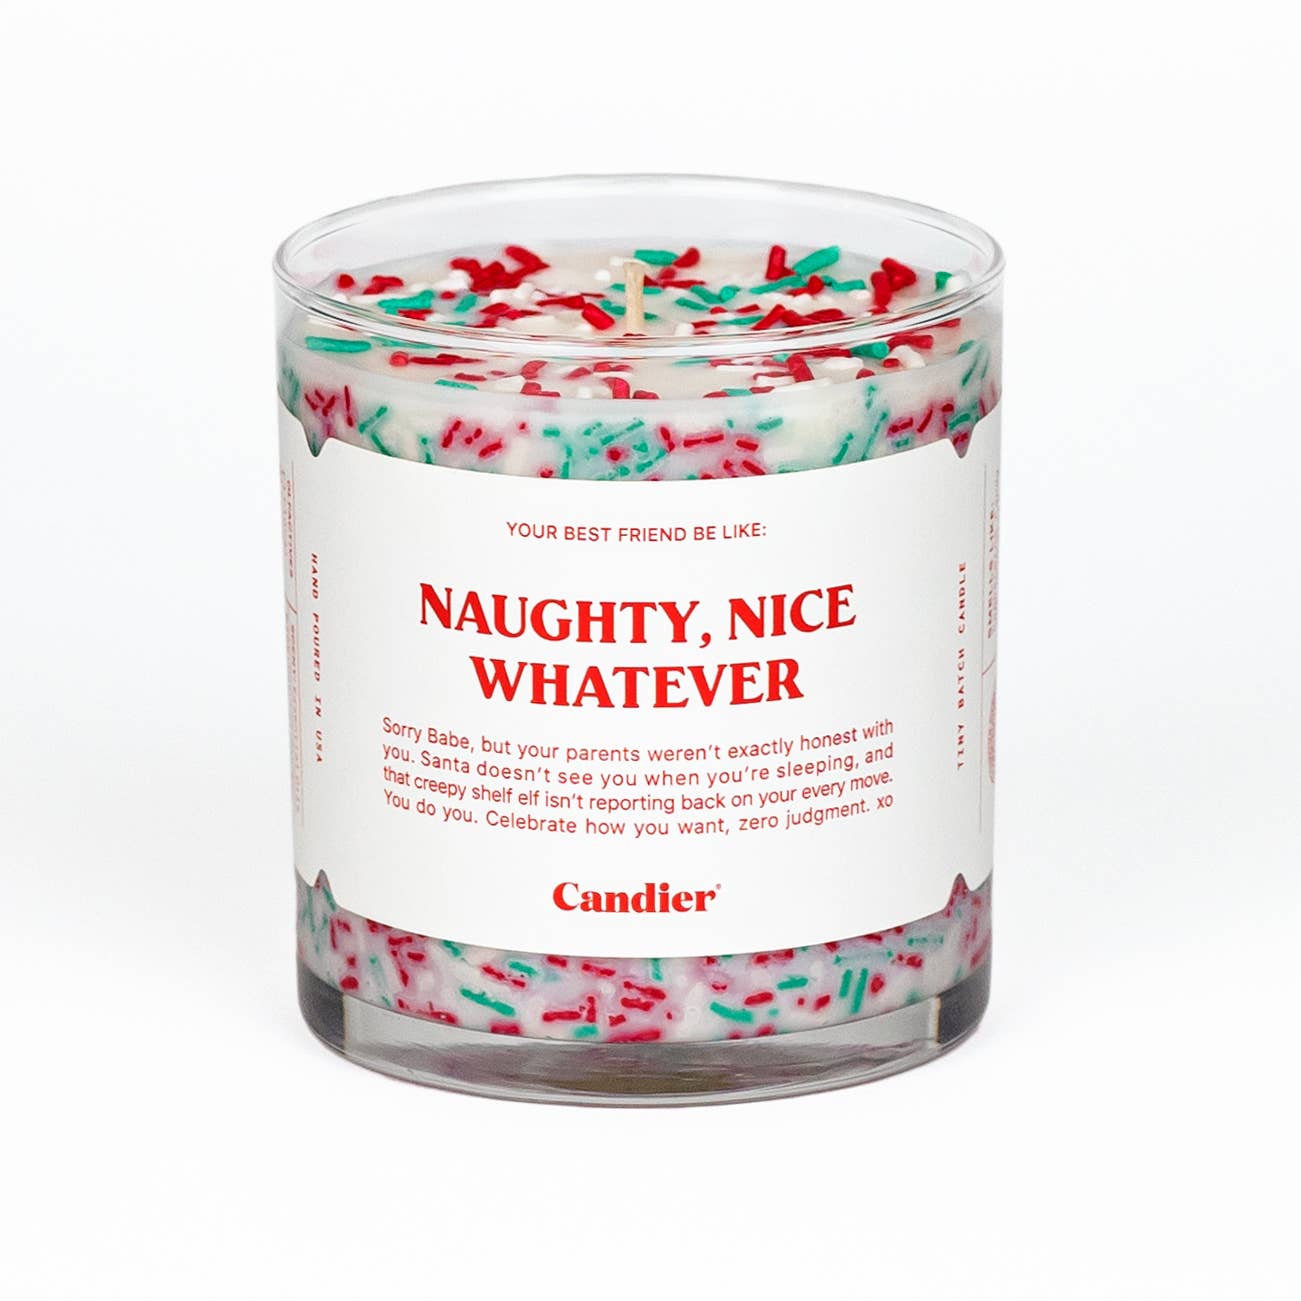 Naughty, Nice Whatever Candle - Floret + Foliage Flower delivery in Fargo, North Dakota